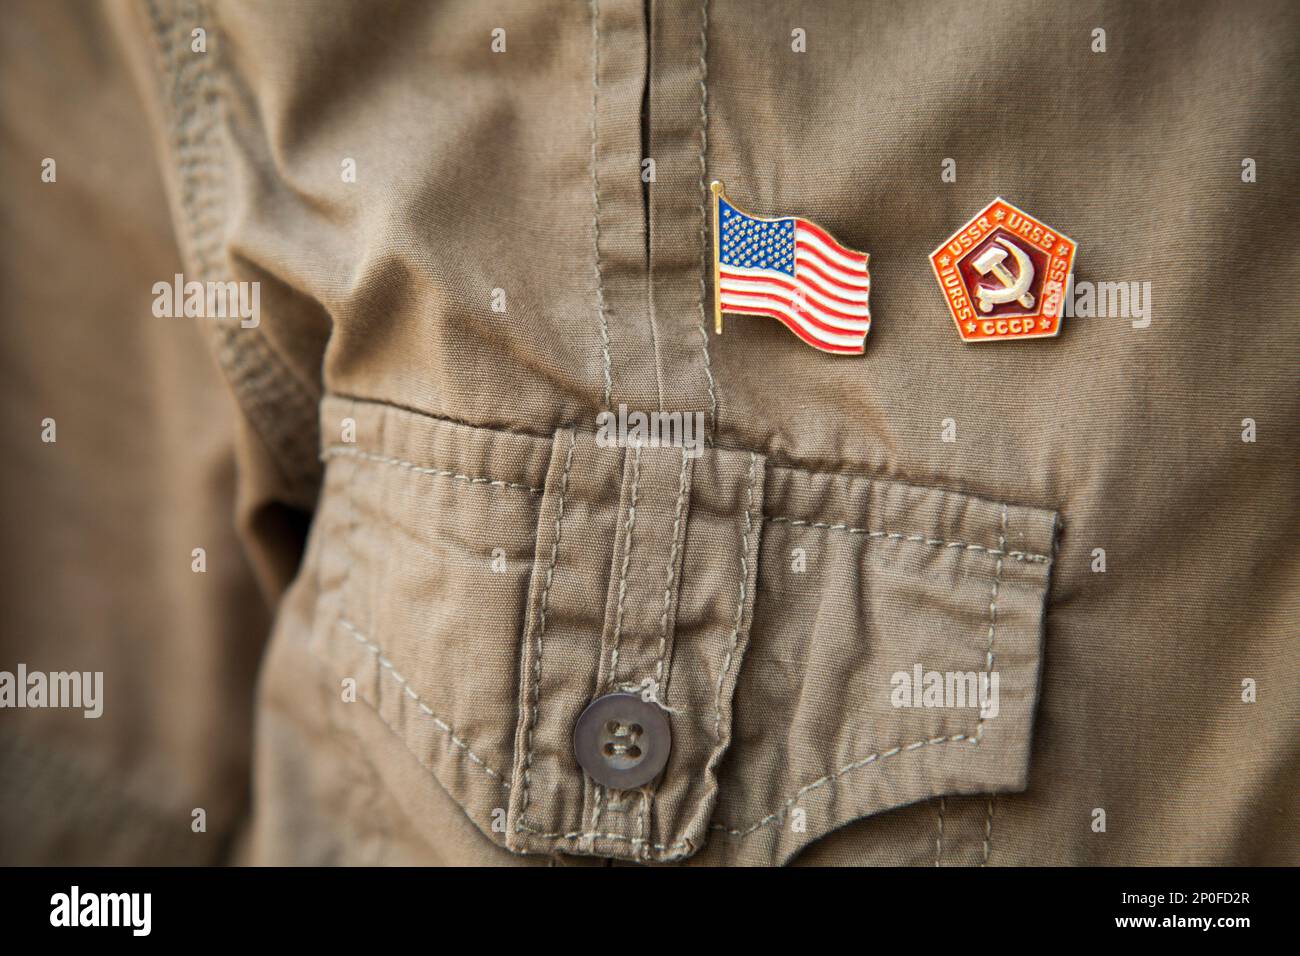 USSR & USA flag, historic national emblem on a khaki shirt person chest: Stars and stripes, hammer and sickle close-up. Partnership or confrontation Stock Photo